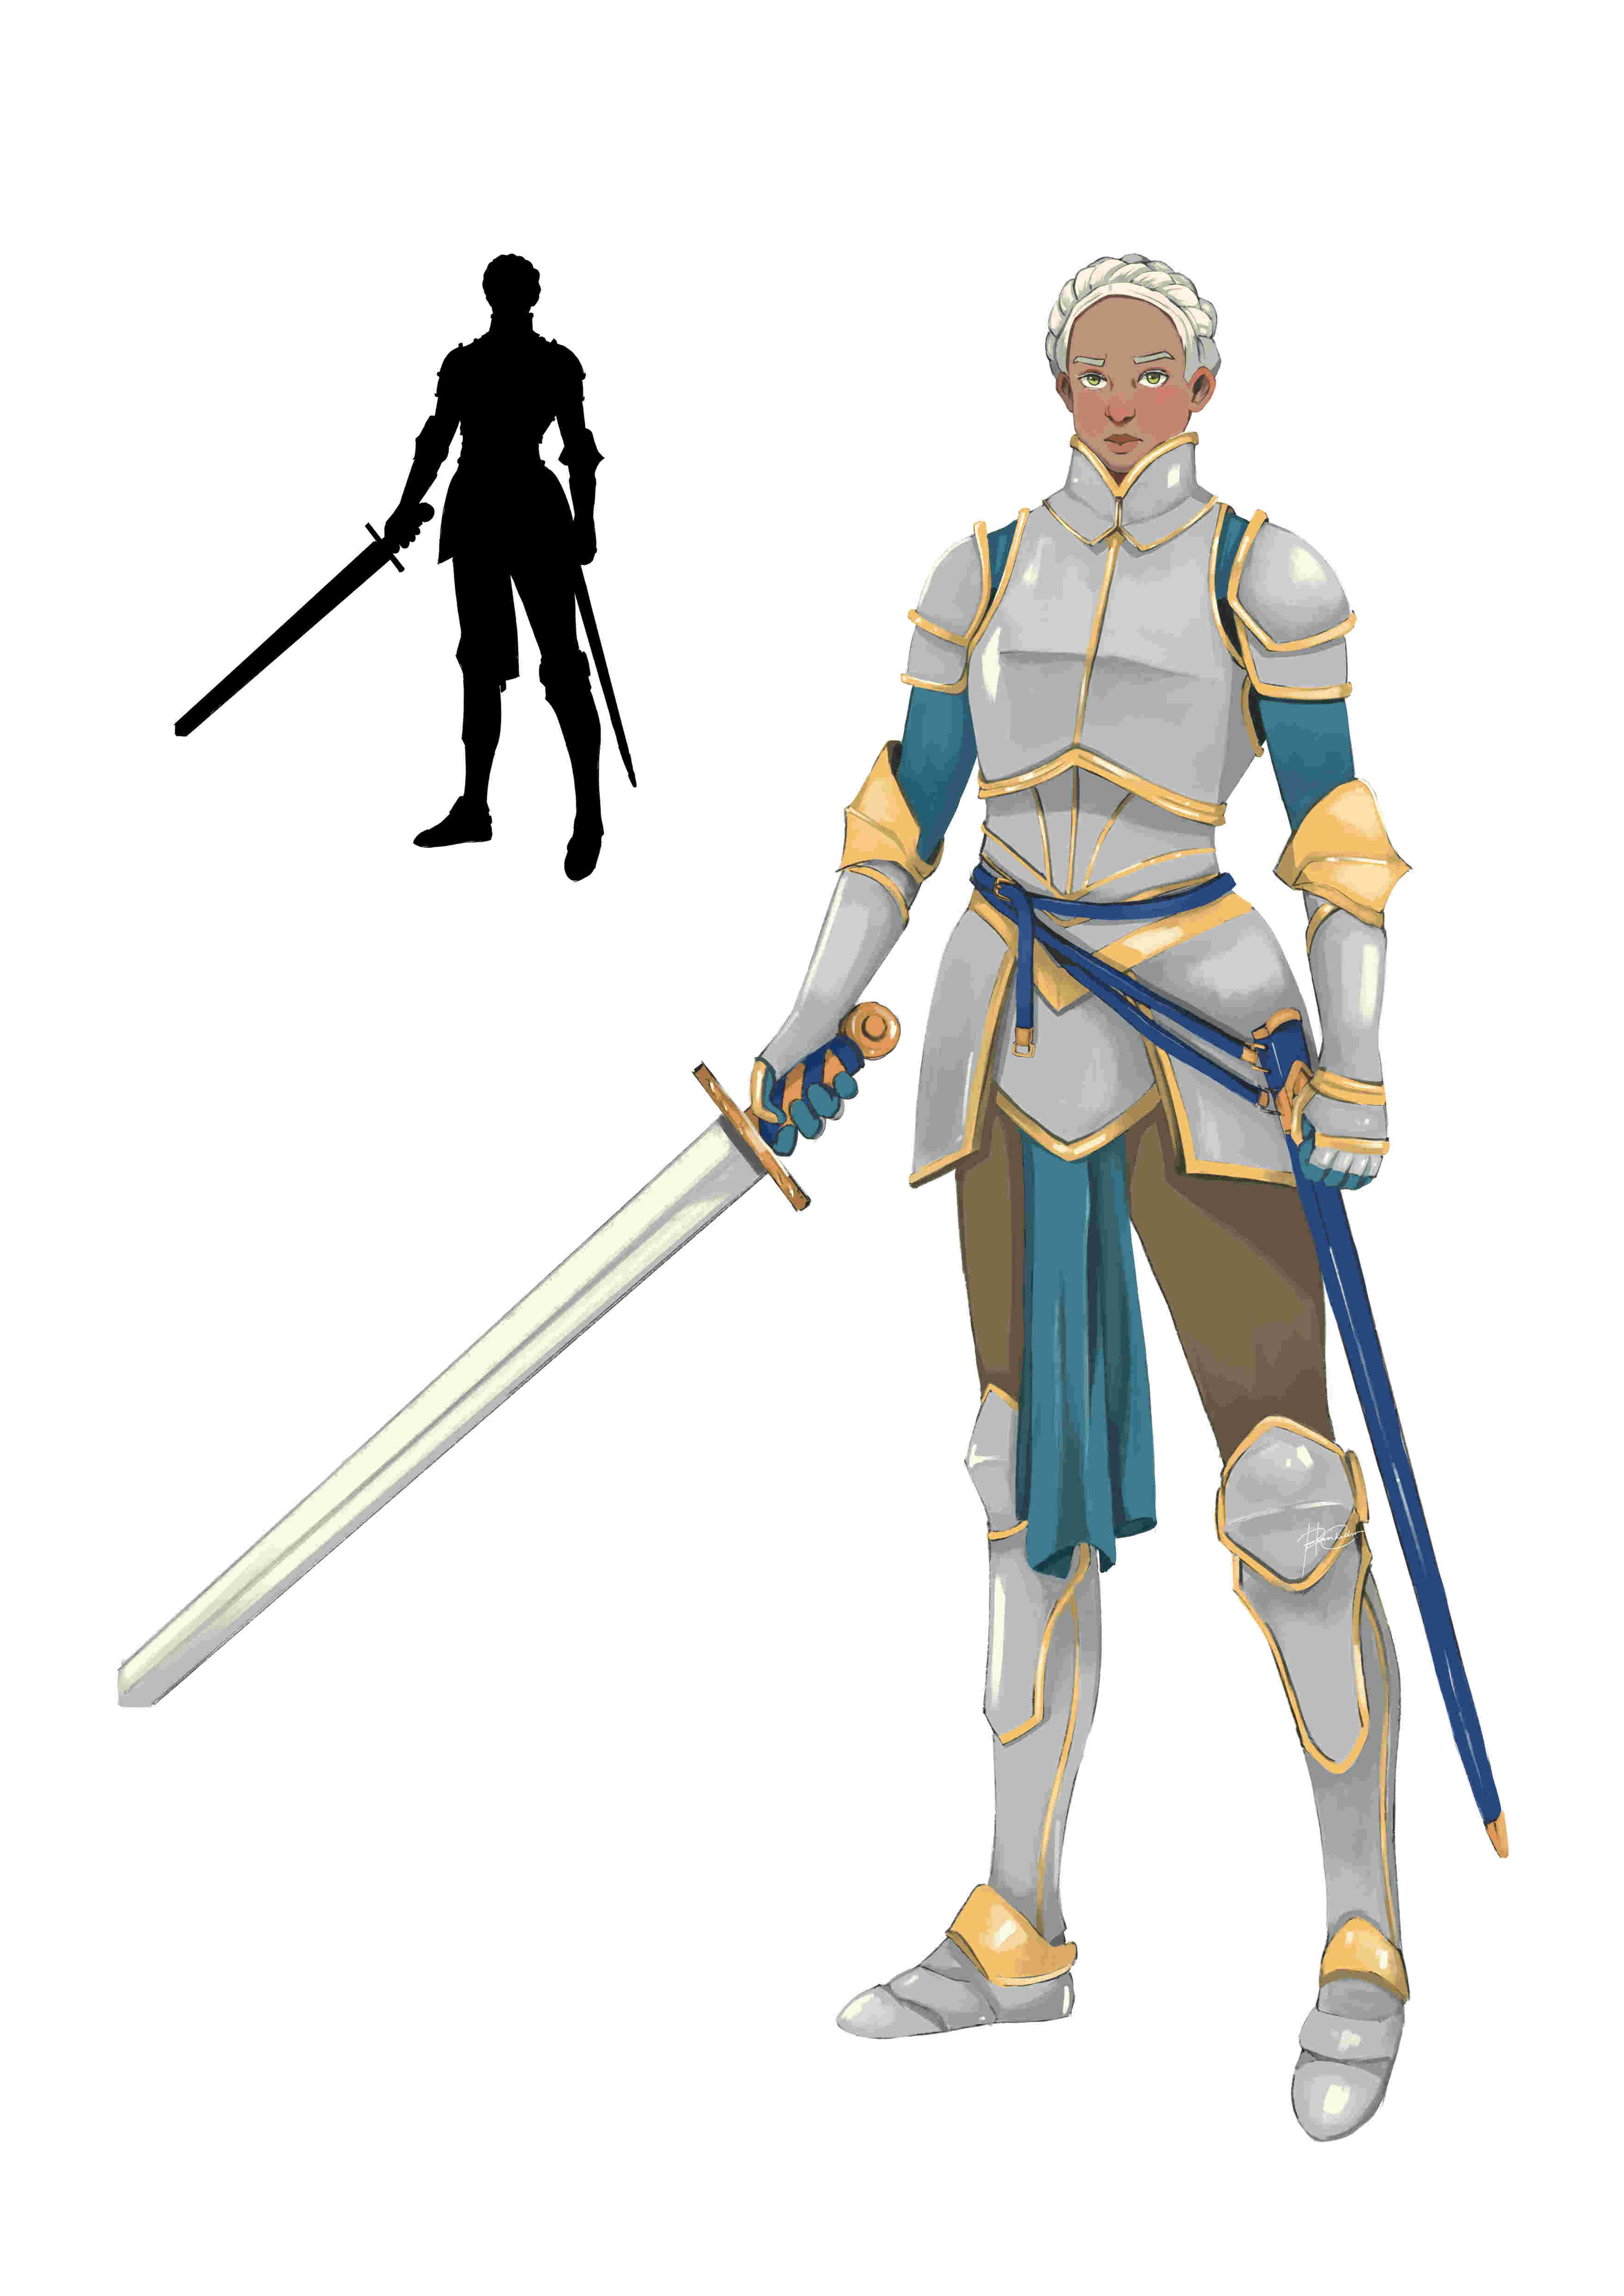 Character Design (Female Knight), 2021